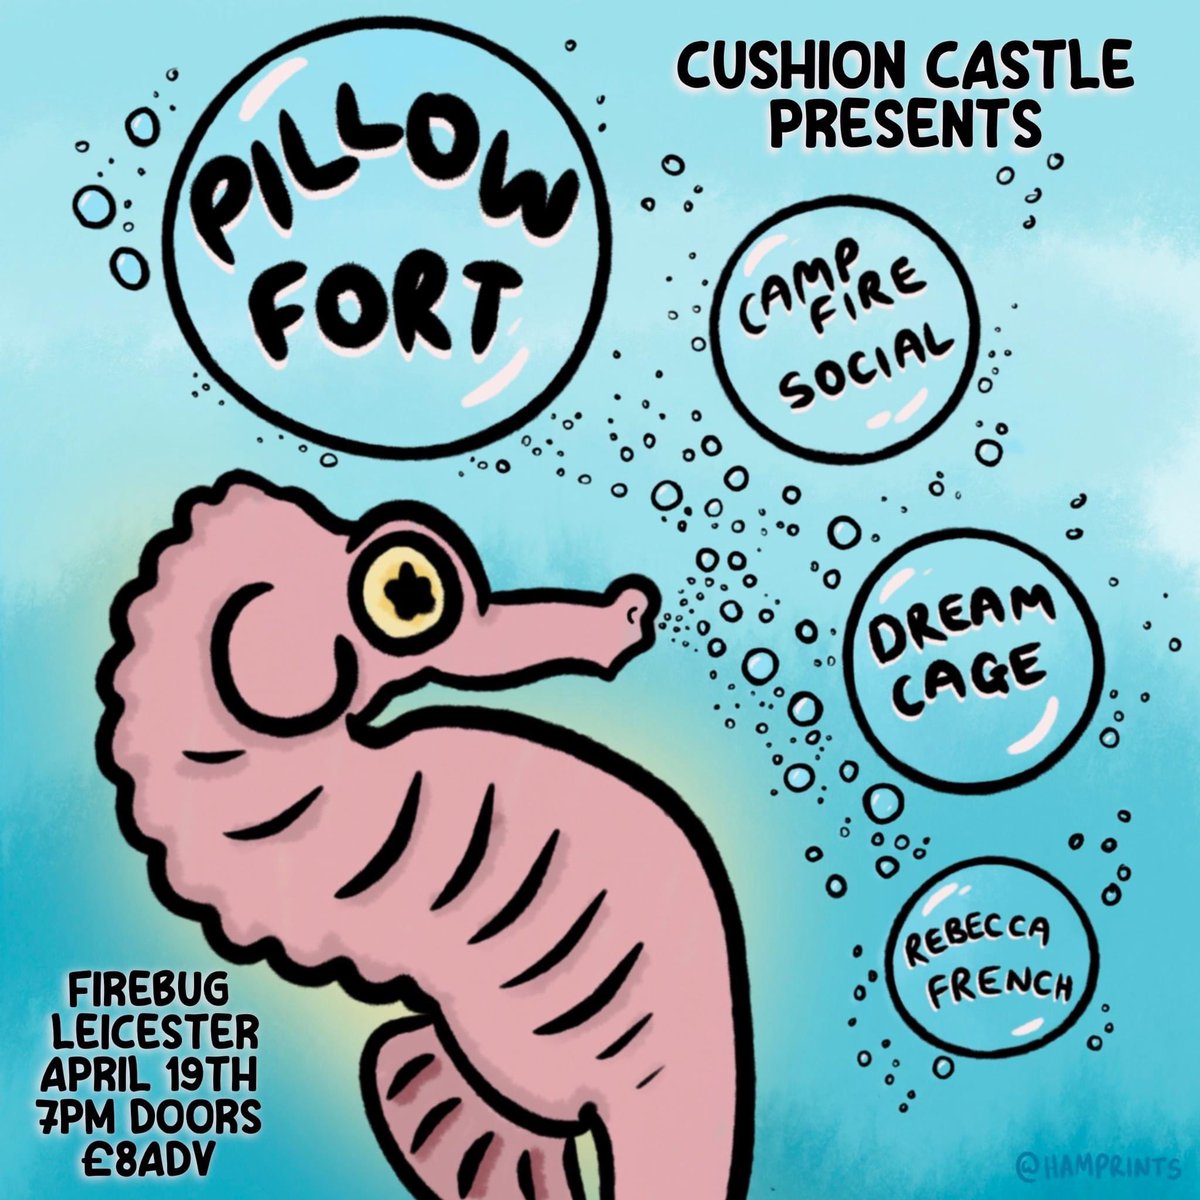 Friday is gonna be nuts! Heading to @FirebugBar W/ @pillowfortUK DreamCage and Rebecca French!!! @CushionCastle @popty_ping_ #WhatsOnThisWeekend #Gigs #Emo #Midwest #GottaGetDownOnFriday #ThatsOneCuteSeahorse